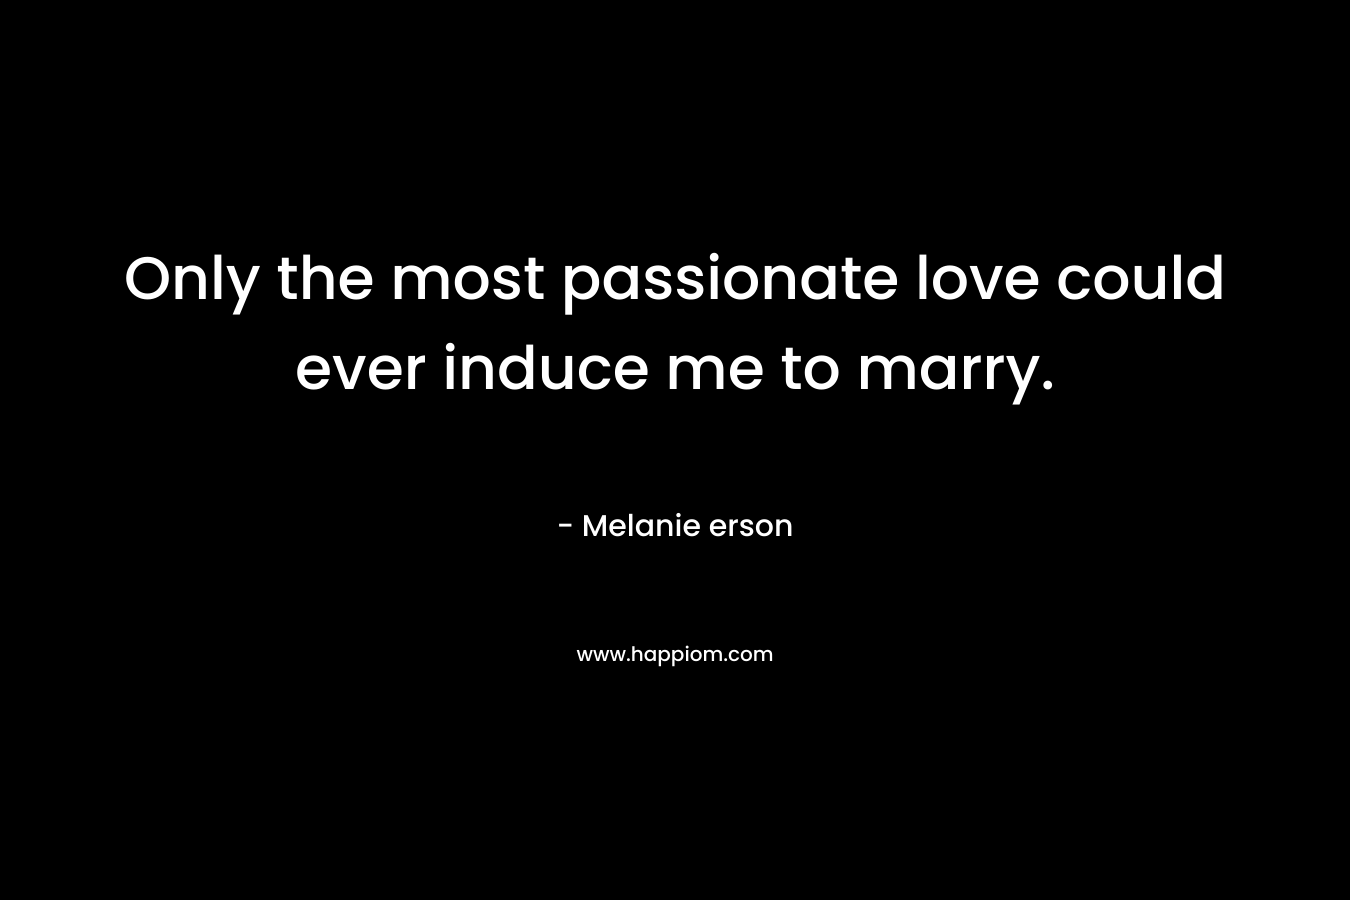 Only the most passionate love could ever induce me to marry.